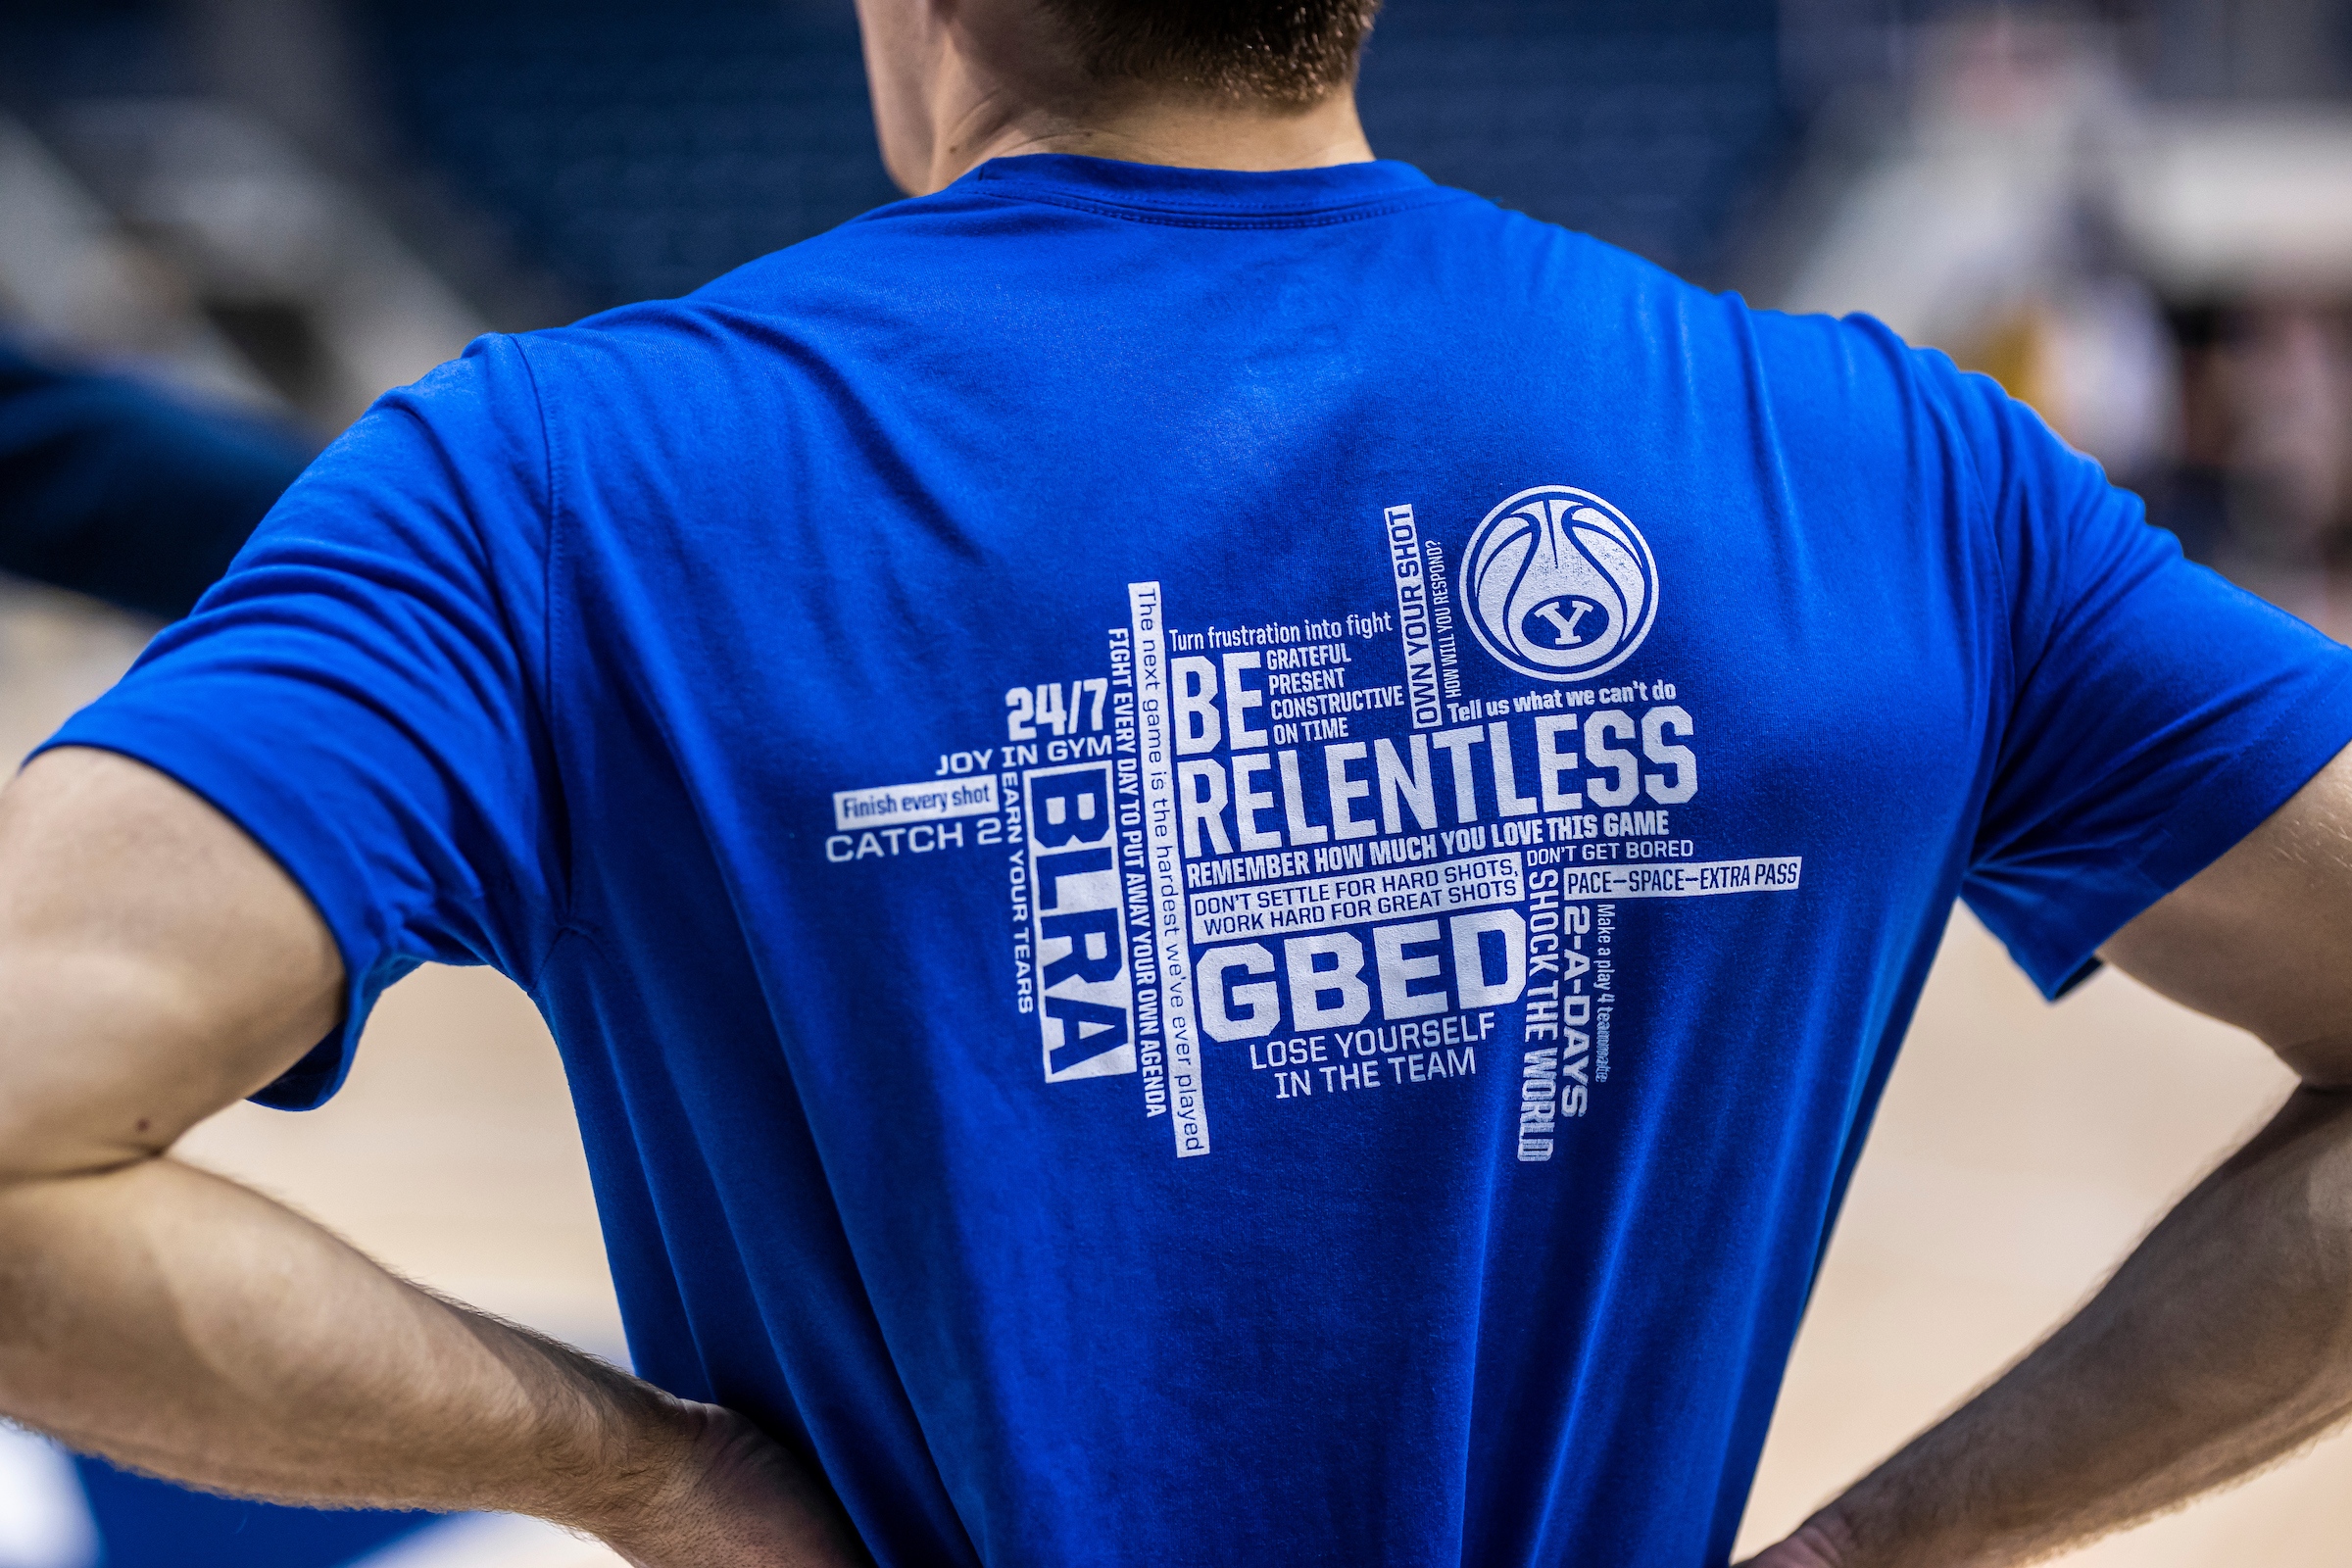 The BYU men's basketball "Word Wall" is displayed on the back of t-shirts worn by the players and staff.